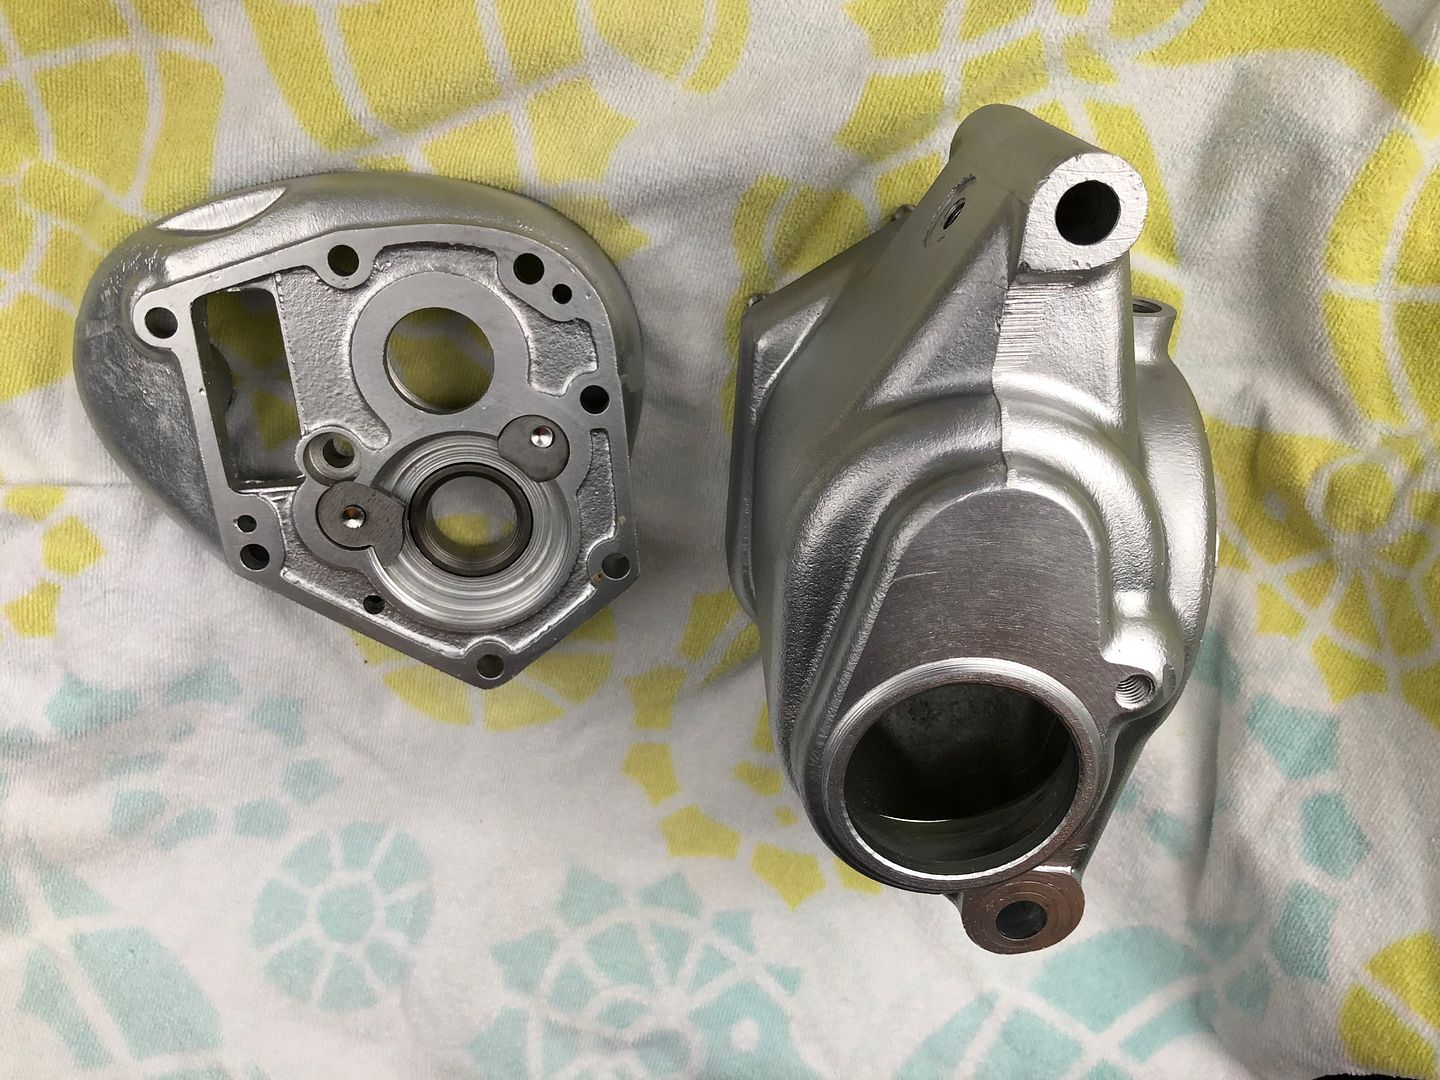 Cleaning Engine Cases